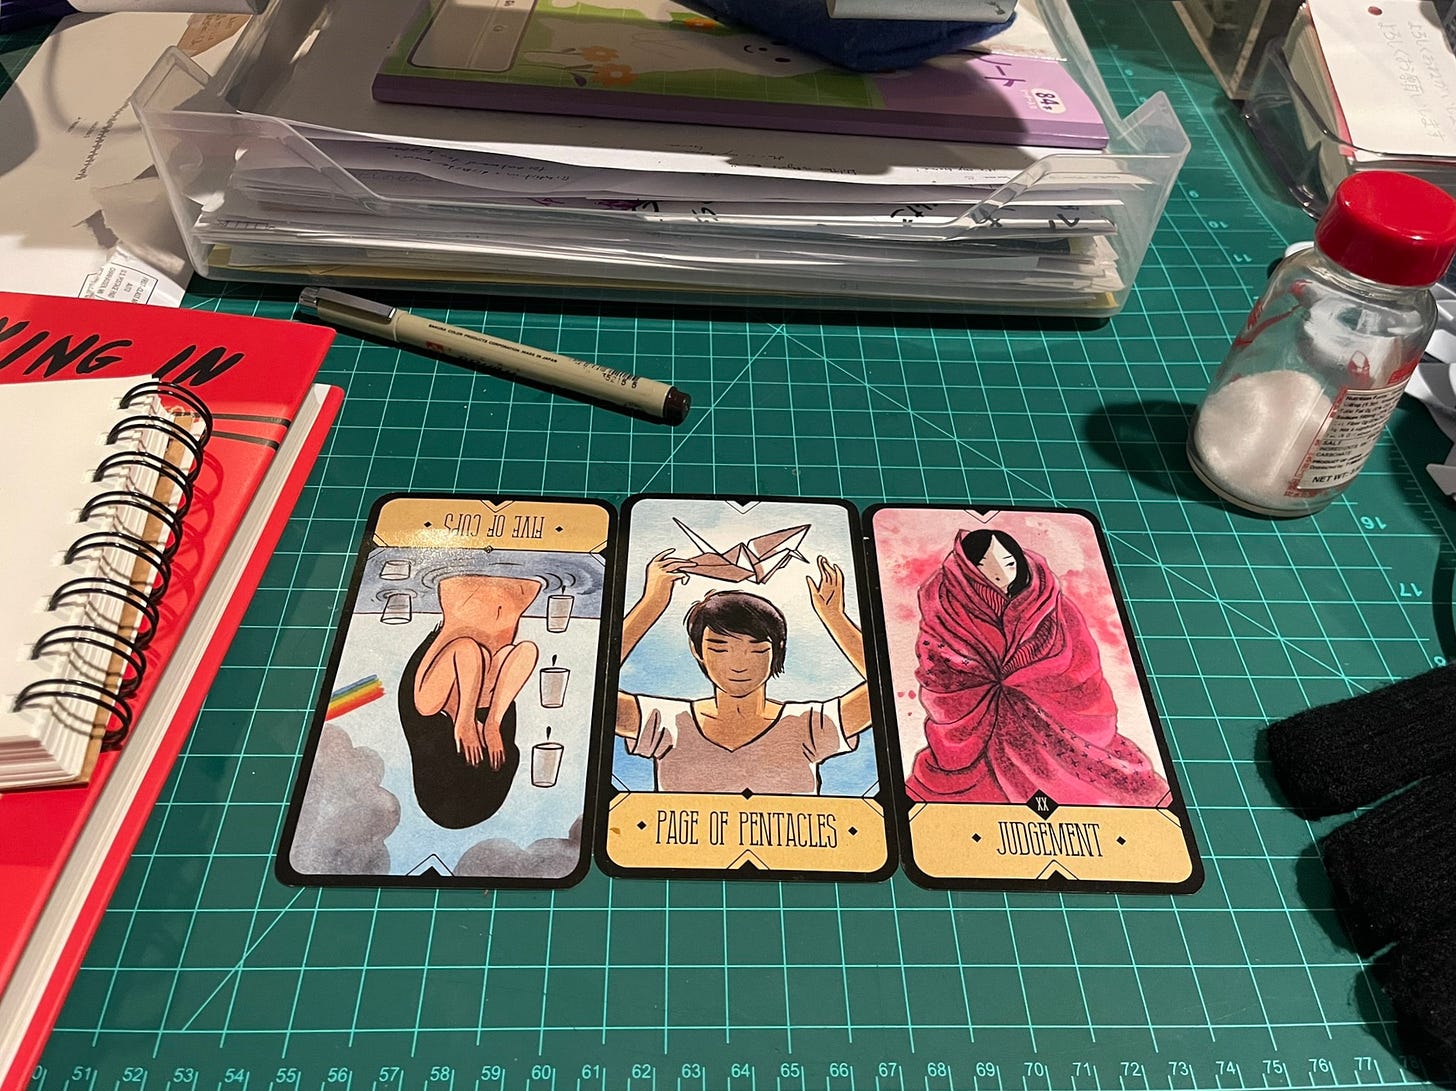 A picture of my messy desk, with a three card tarot spread in the center. The cards are five of cups reversed, page of pentacles, and judgement. Scattered around the cards is a pen, the book Crying in H-Mart, a salt shaker, gloves, and a lot of paper.